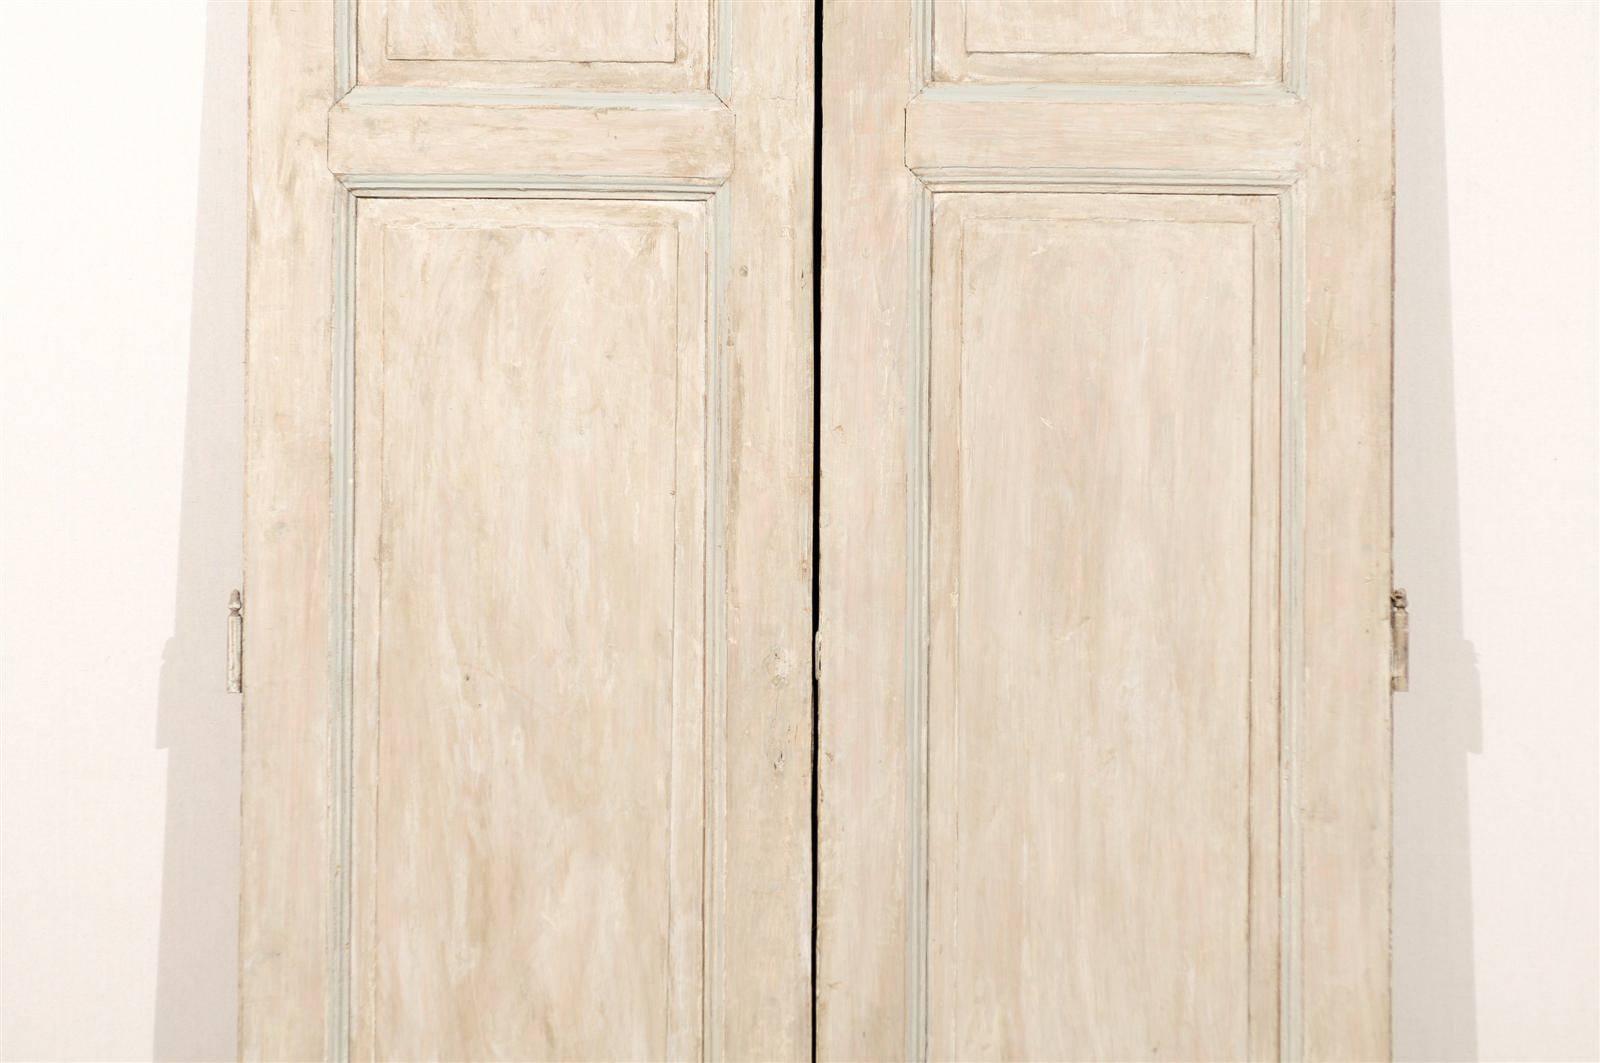 Pair of Tall French Doors from the Mid-19th Century im Zustand „Gut“ in Atlanta, GA